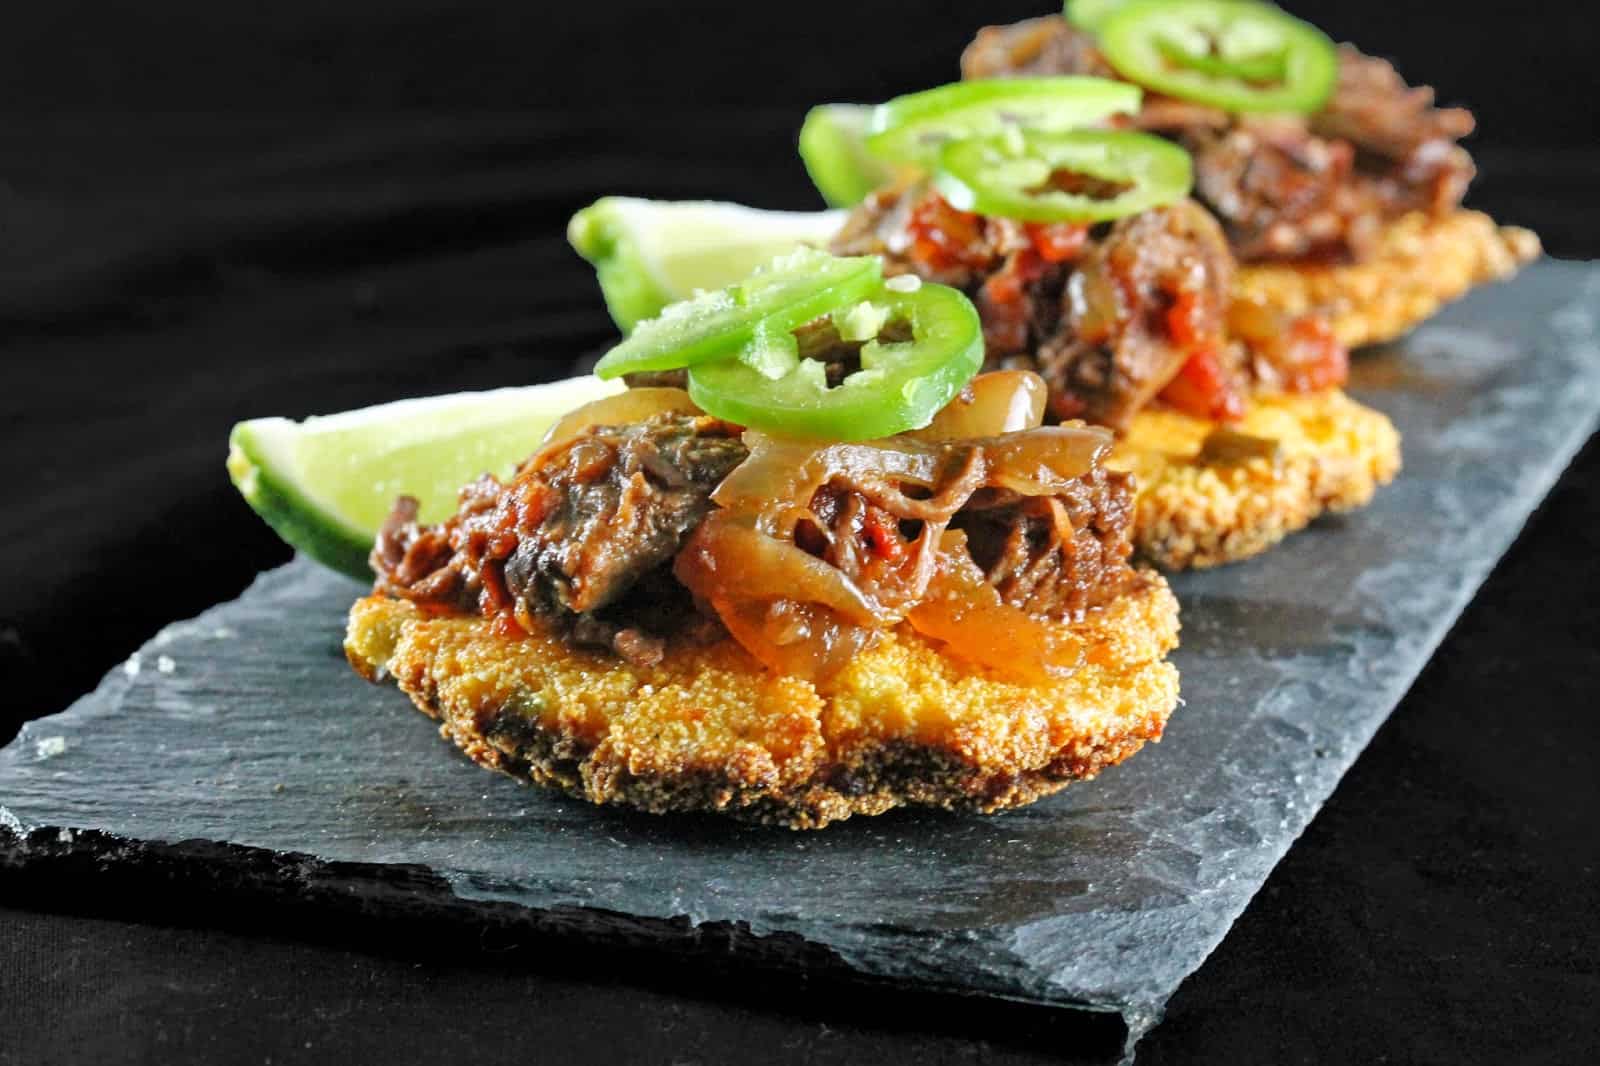 Slow Cooker Ancho Chili Shredded Beef over Corn Fritters is garnished with sliced fresh jalapenos and limes